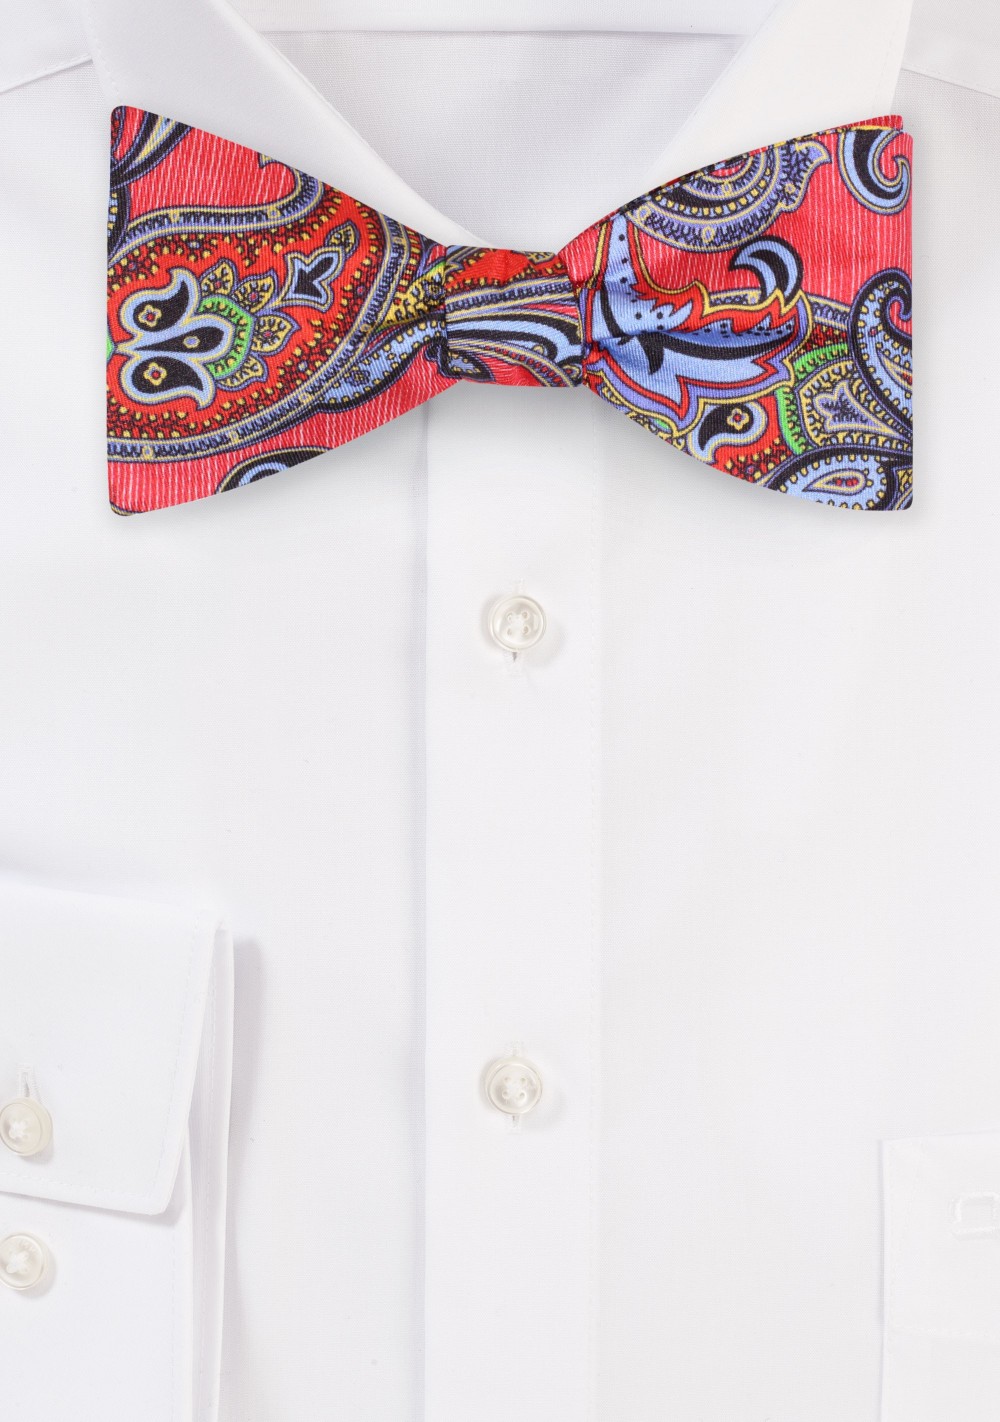 Striped Paisley Silk Bowtie in Red and Blue